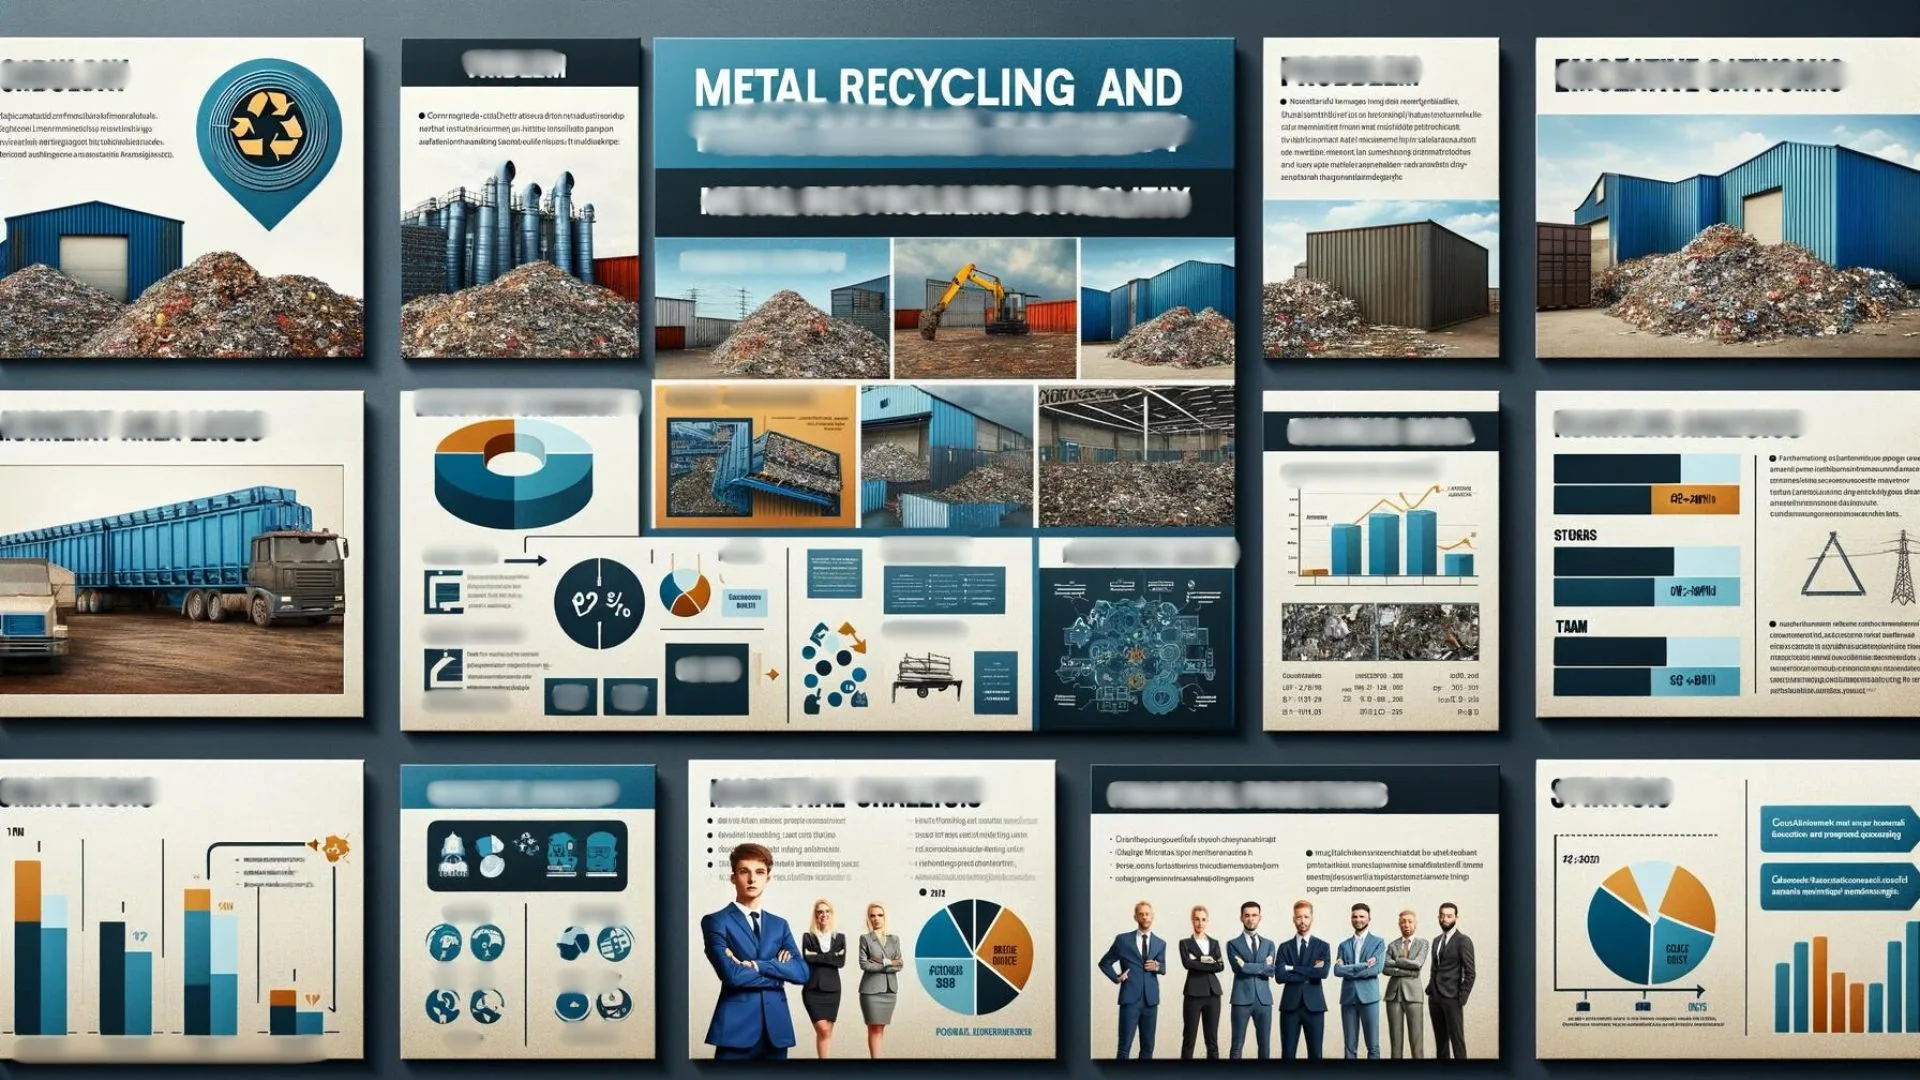 metal-recycling-and-processing-pitch-deck-mockup.jpg